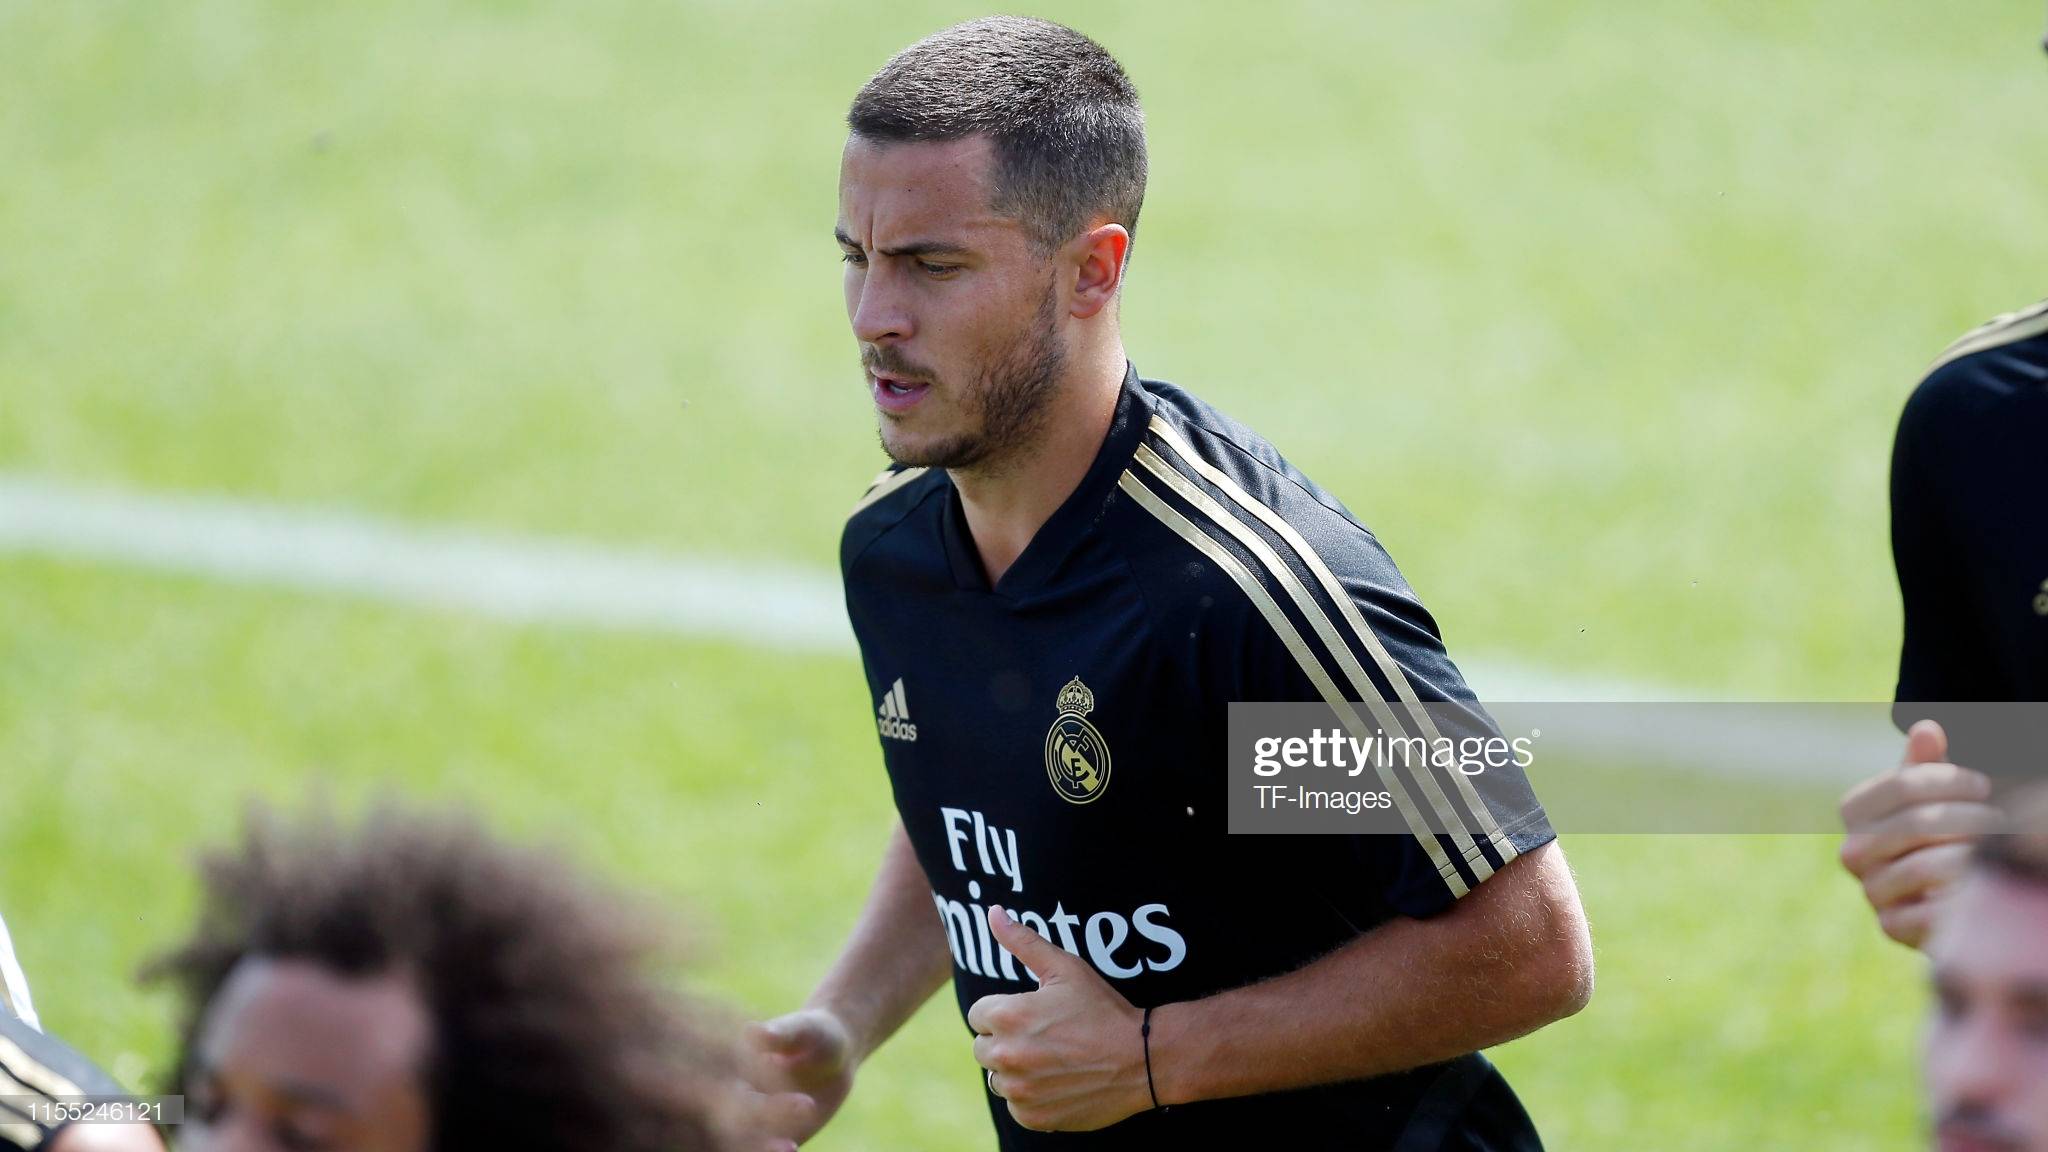 Hazard Looks to Impress In First Game